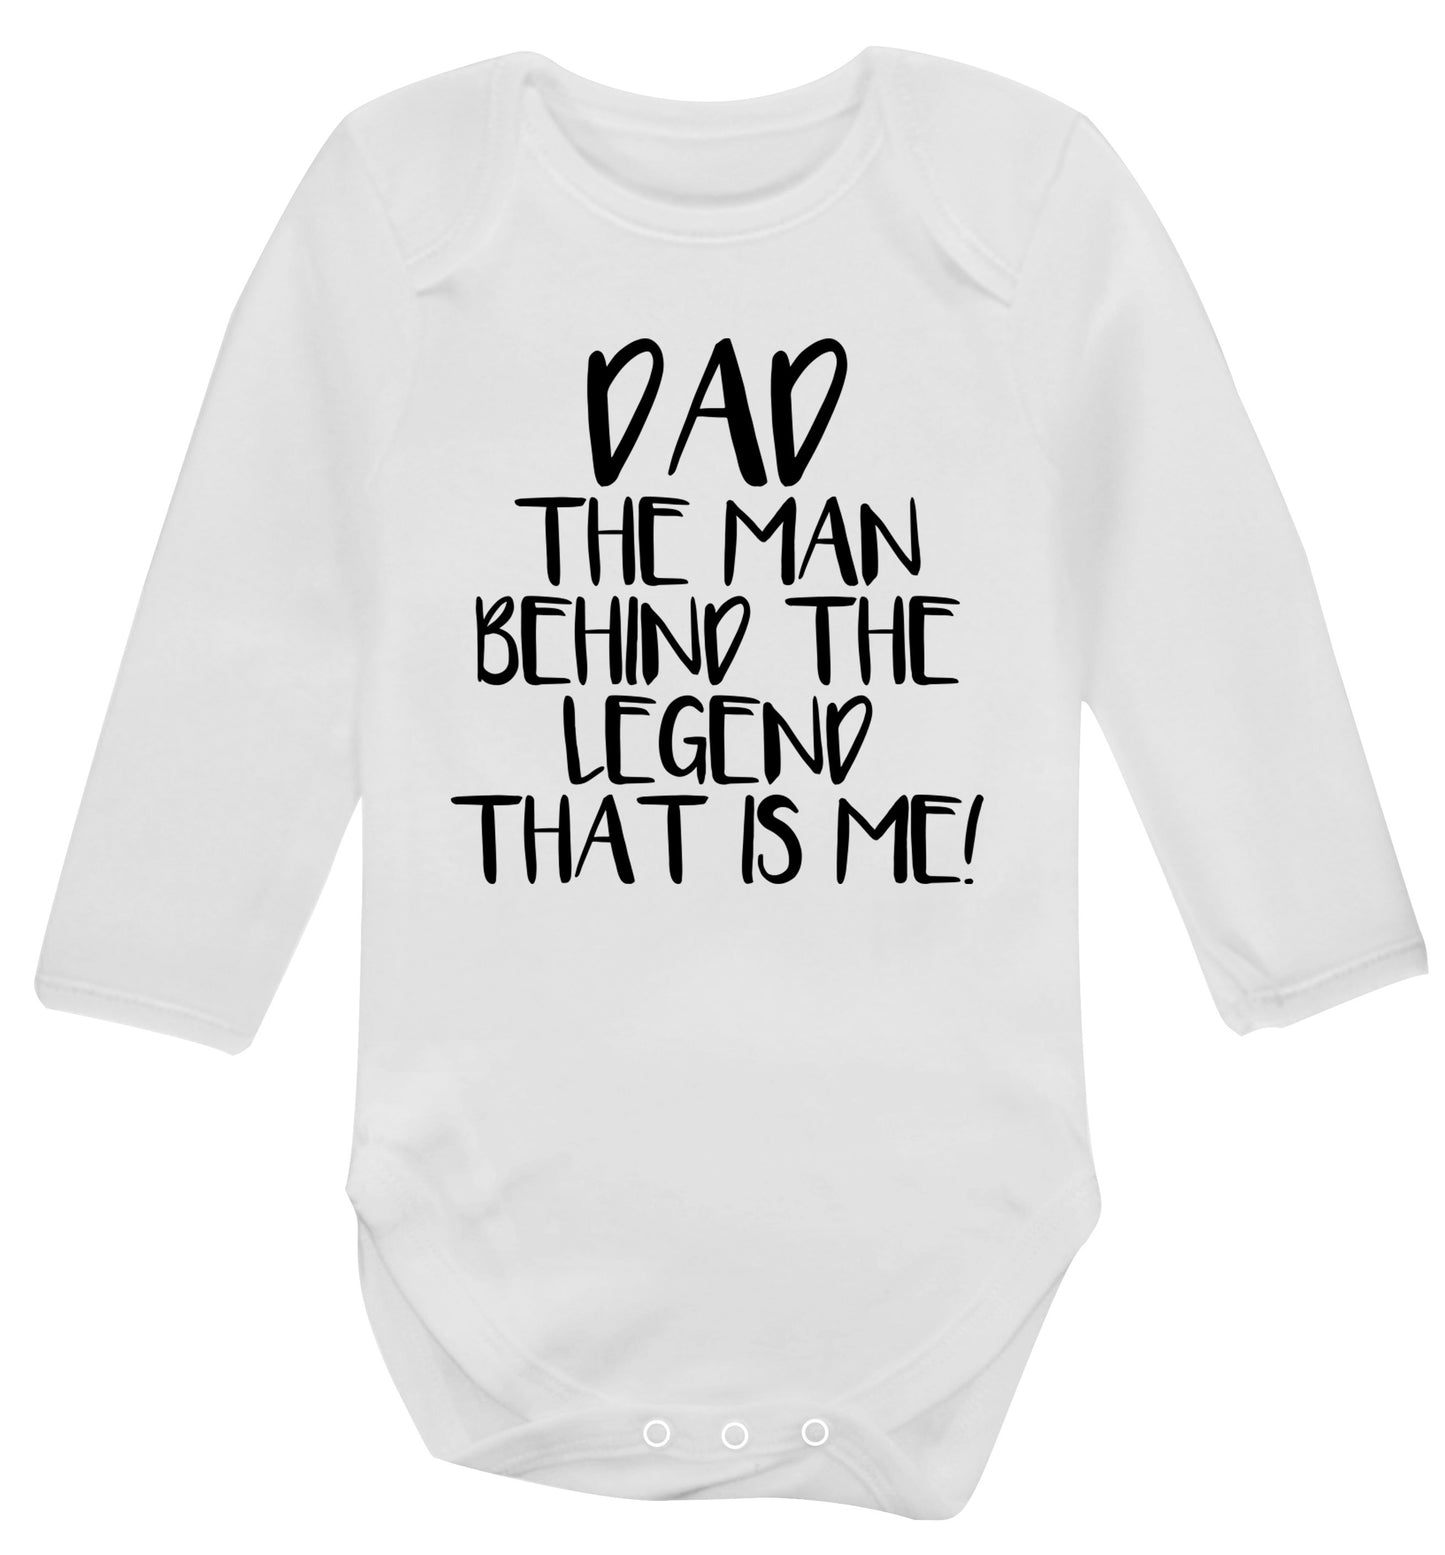 Dad the man behind the legend that is me! Baby Vest long sleeved white 6-12 months